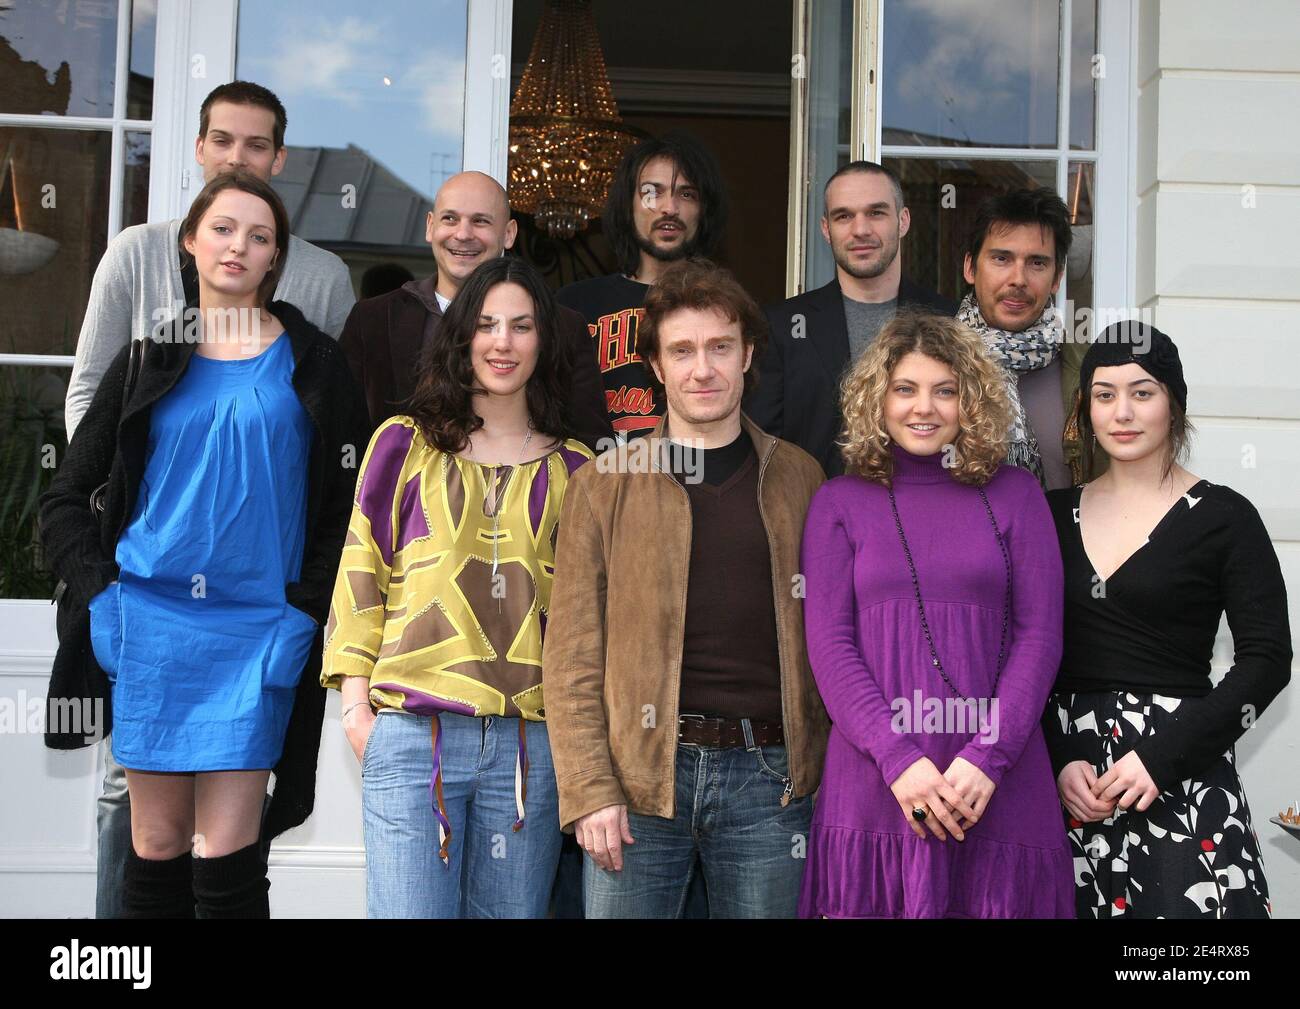 Jury's members from short movie (L to R) Fanny Valette, Julie Fournier, Stephanie Crayencour, Andy Gillet, Sylvain Goldberg, Vincent Martinez, Philippe Bas and Alexandre Thibault pose for pictures during the 19th Valenciennes film festival in Valenciennes, France on March 29, 2008. Photo by Denis Guignebourg/ABACAPRESS.COM Stock Photo